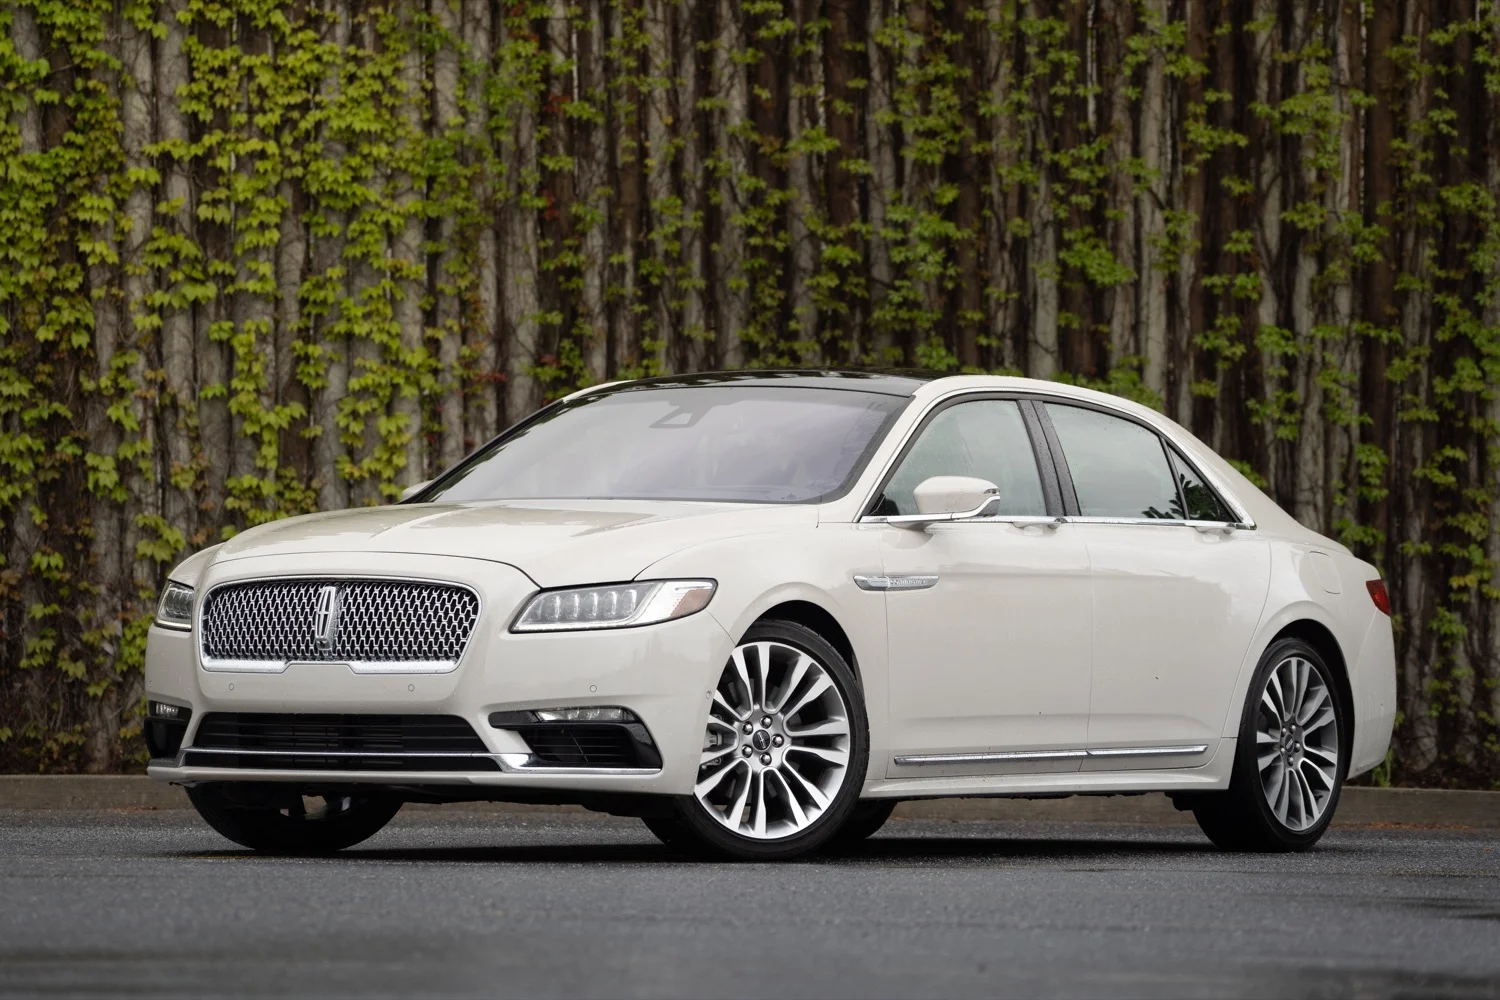 FoMoCo Has No Plans To Bring Back Lincoln Sedans Any Time Soon